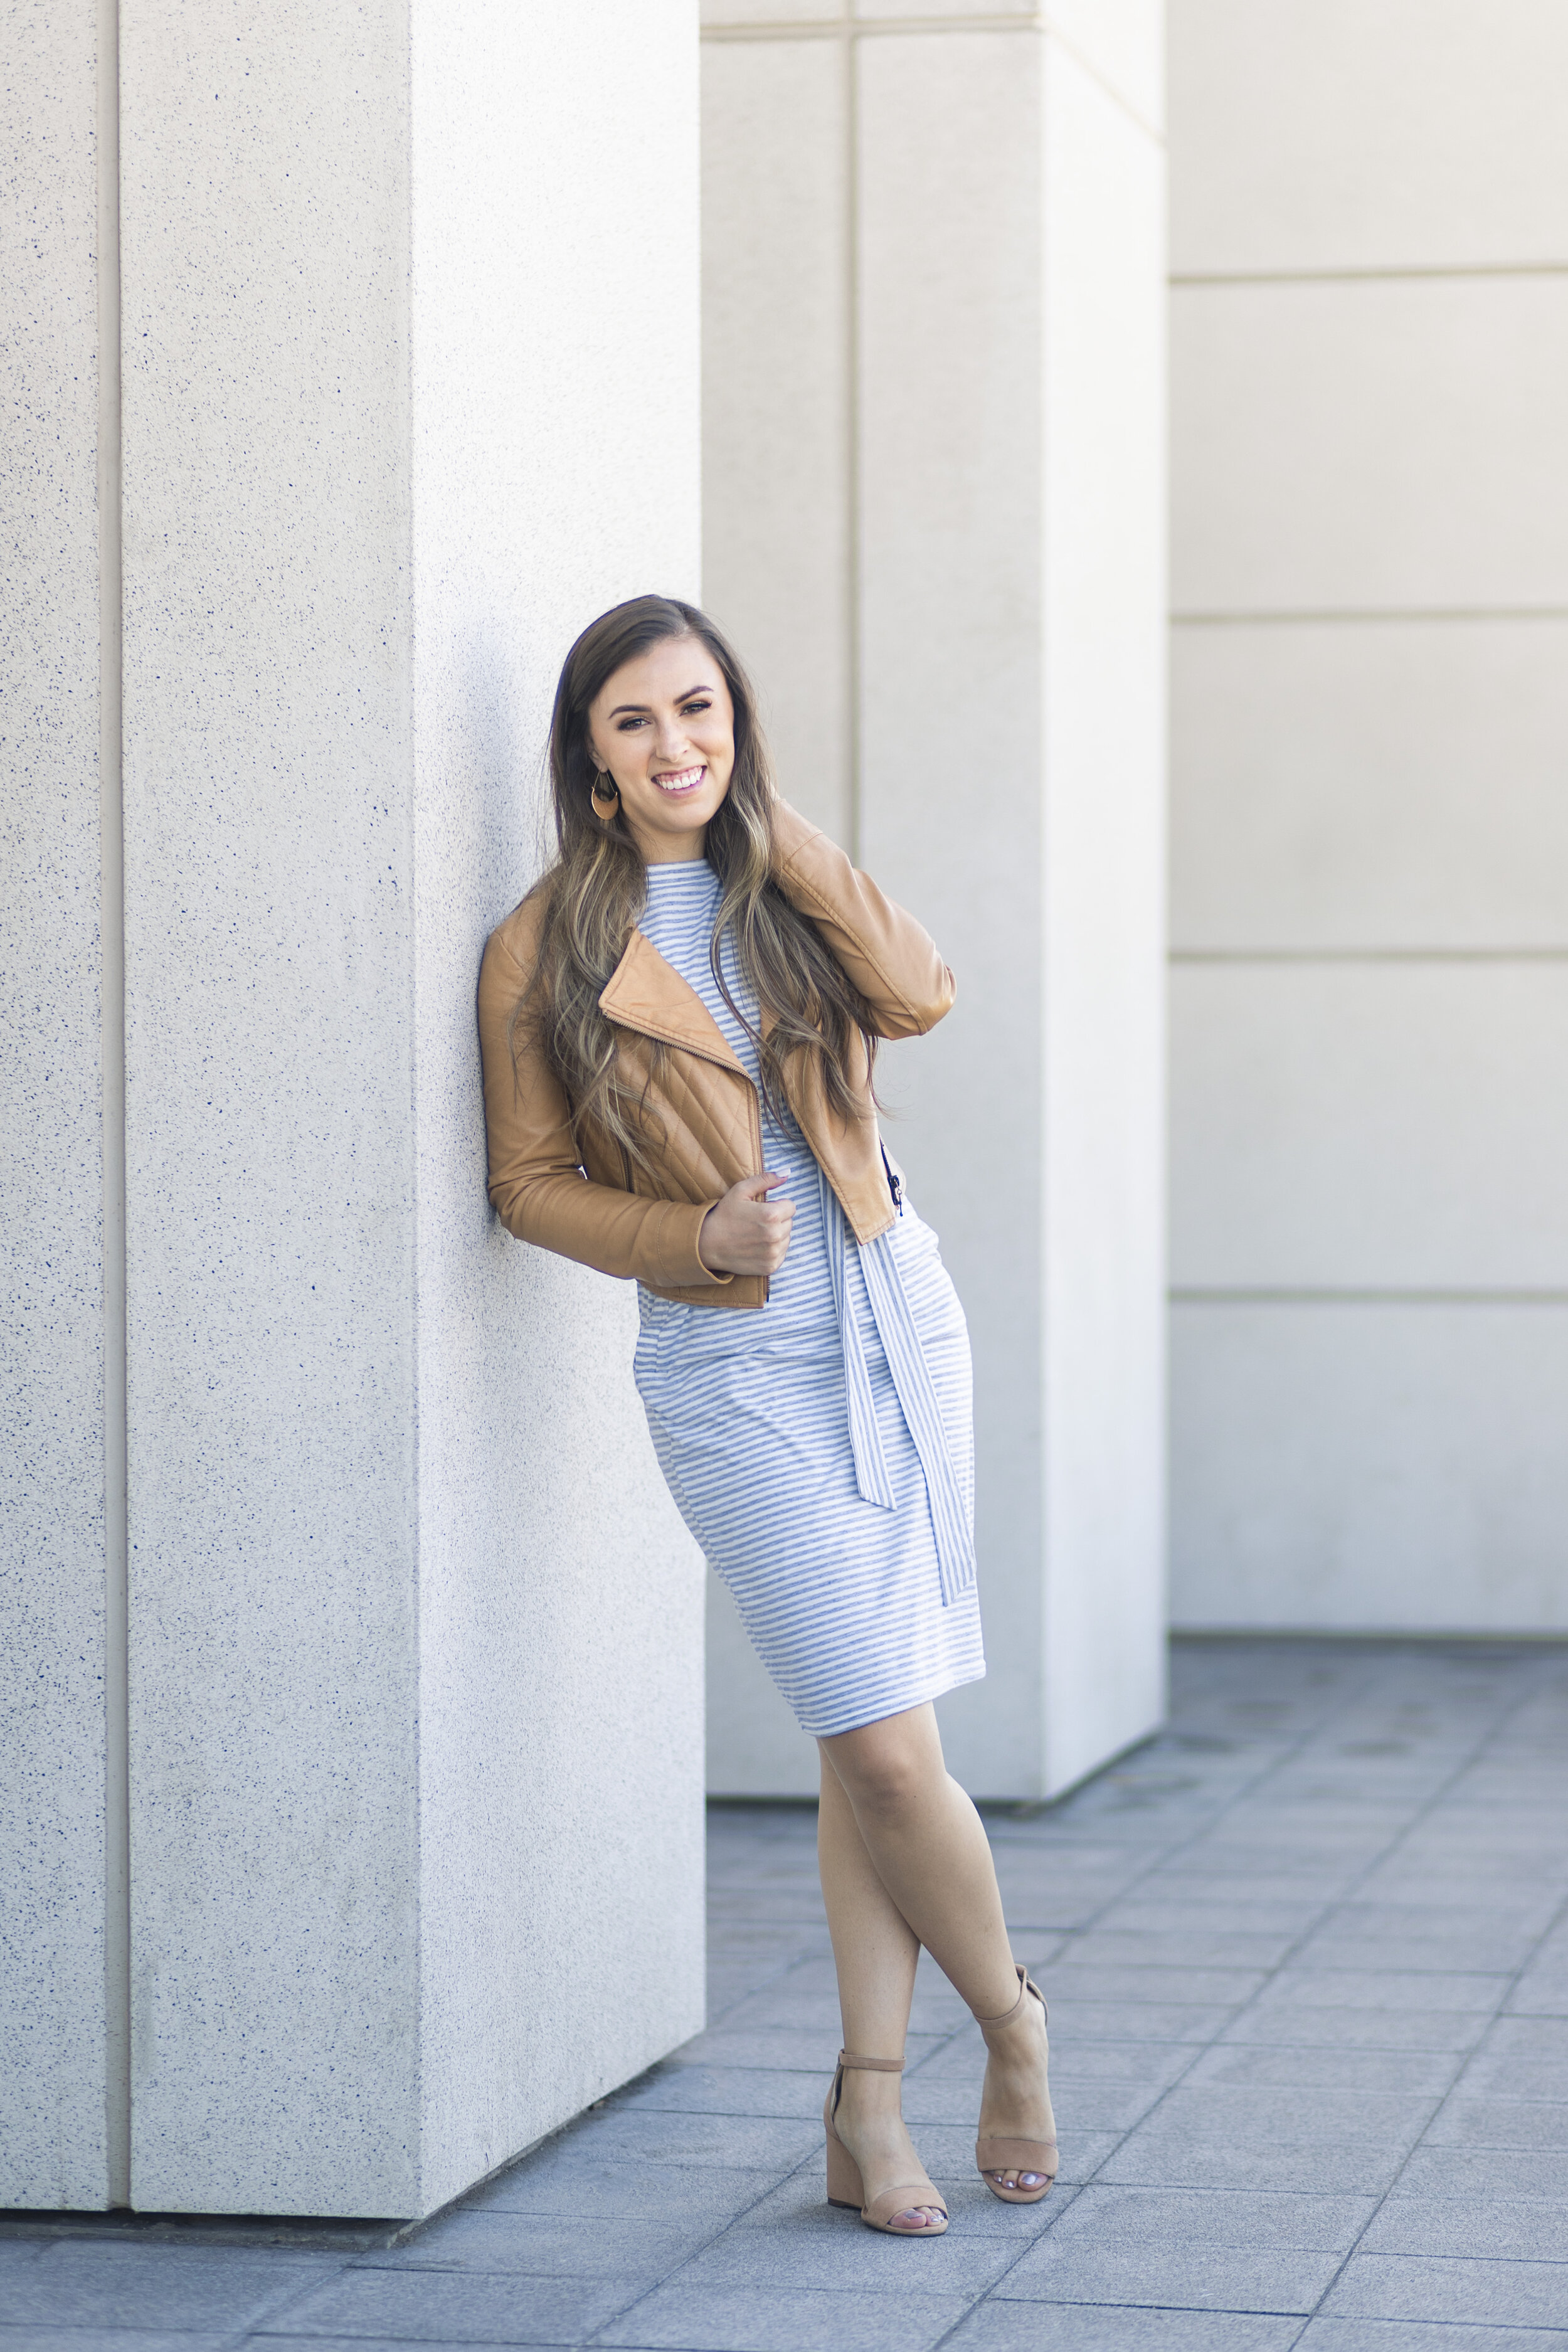  Posed near a cement building in Salt Lake, Utah,, Savanna from Utah Valley’s Clarity Lane Photography shares details about branding photoshoots. leather womens jacket, nude wedge pumps, professional utah valley photographer, brand photoshoot, profes